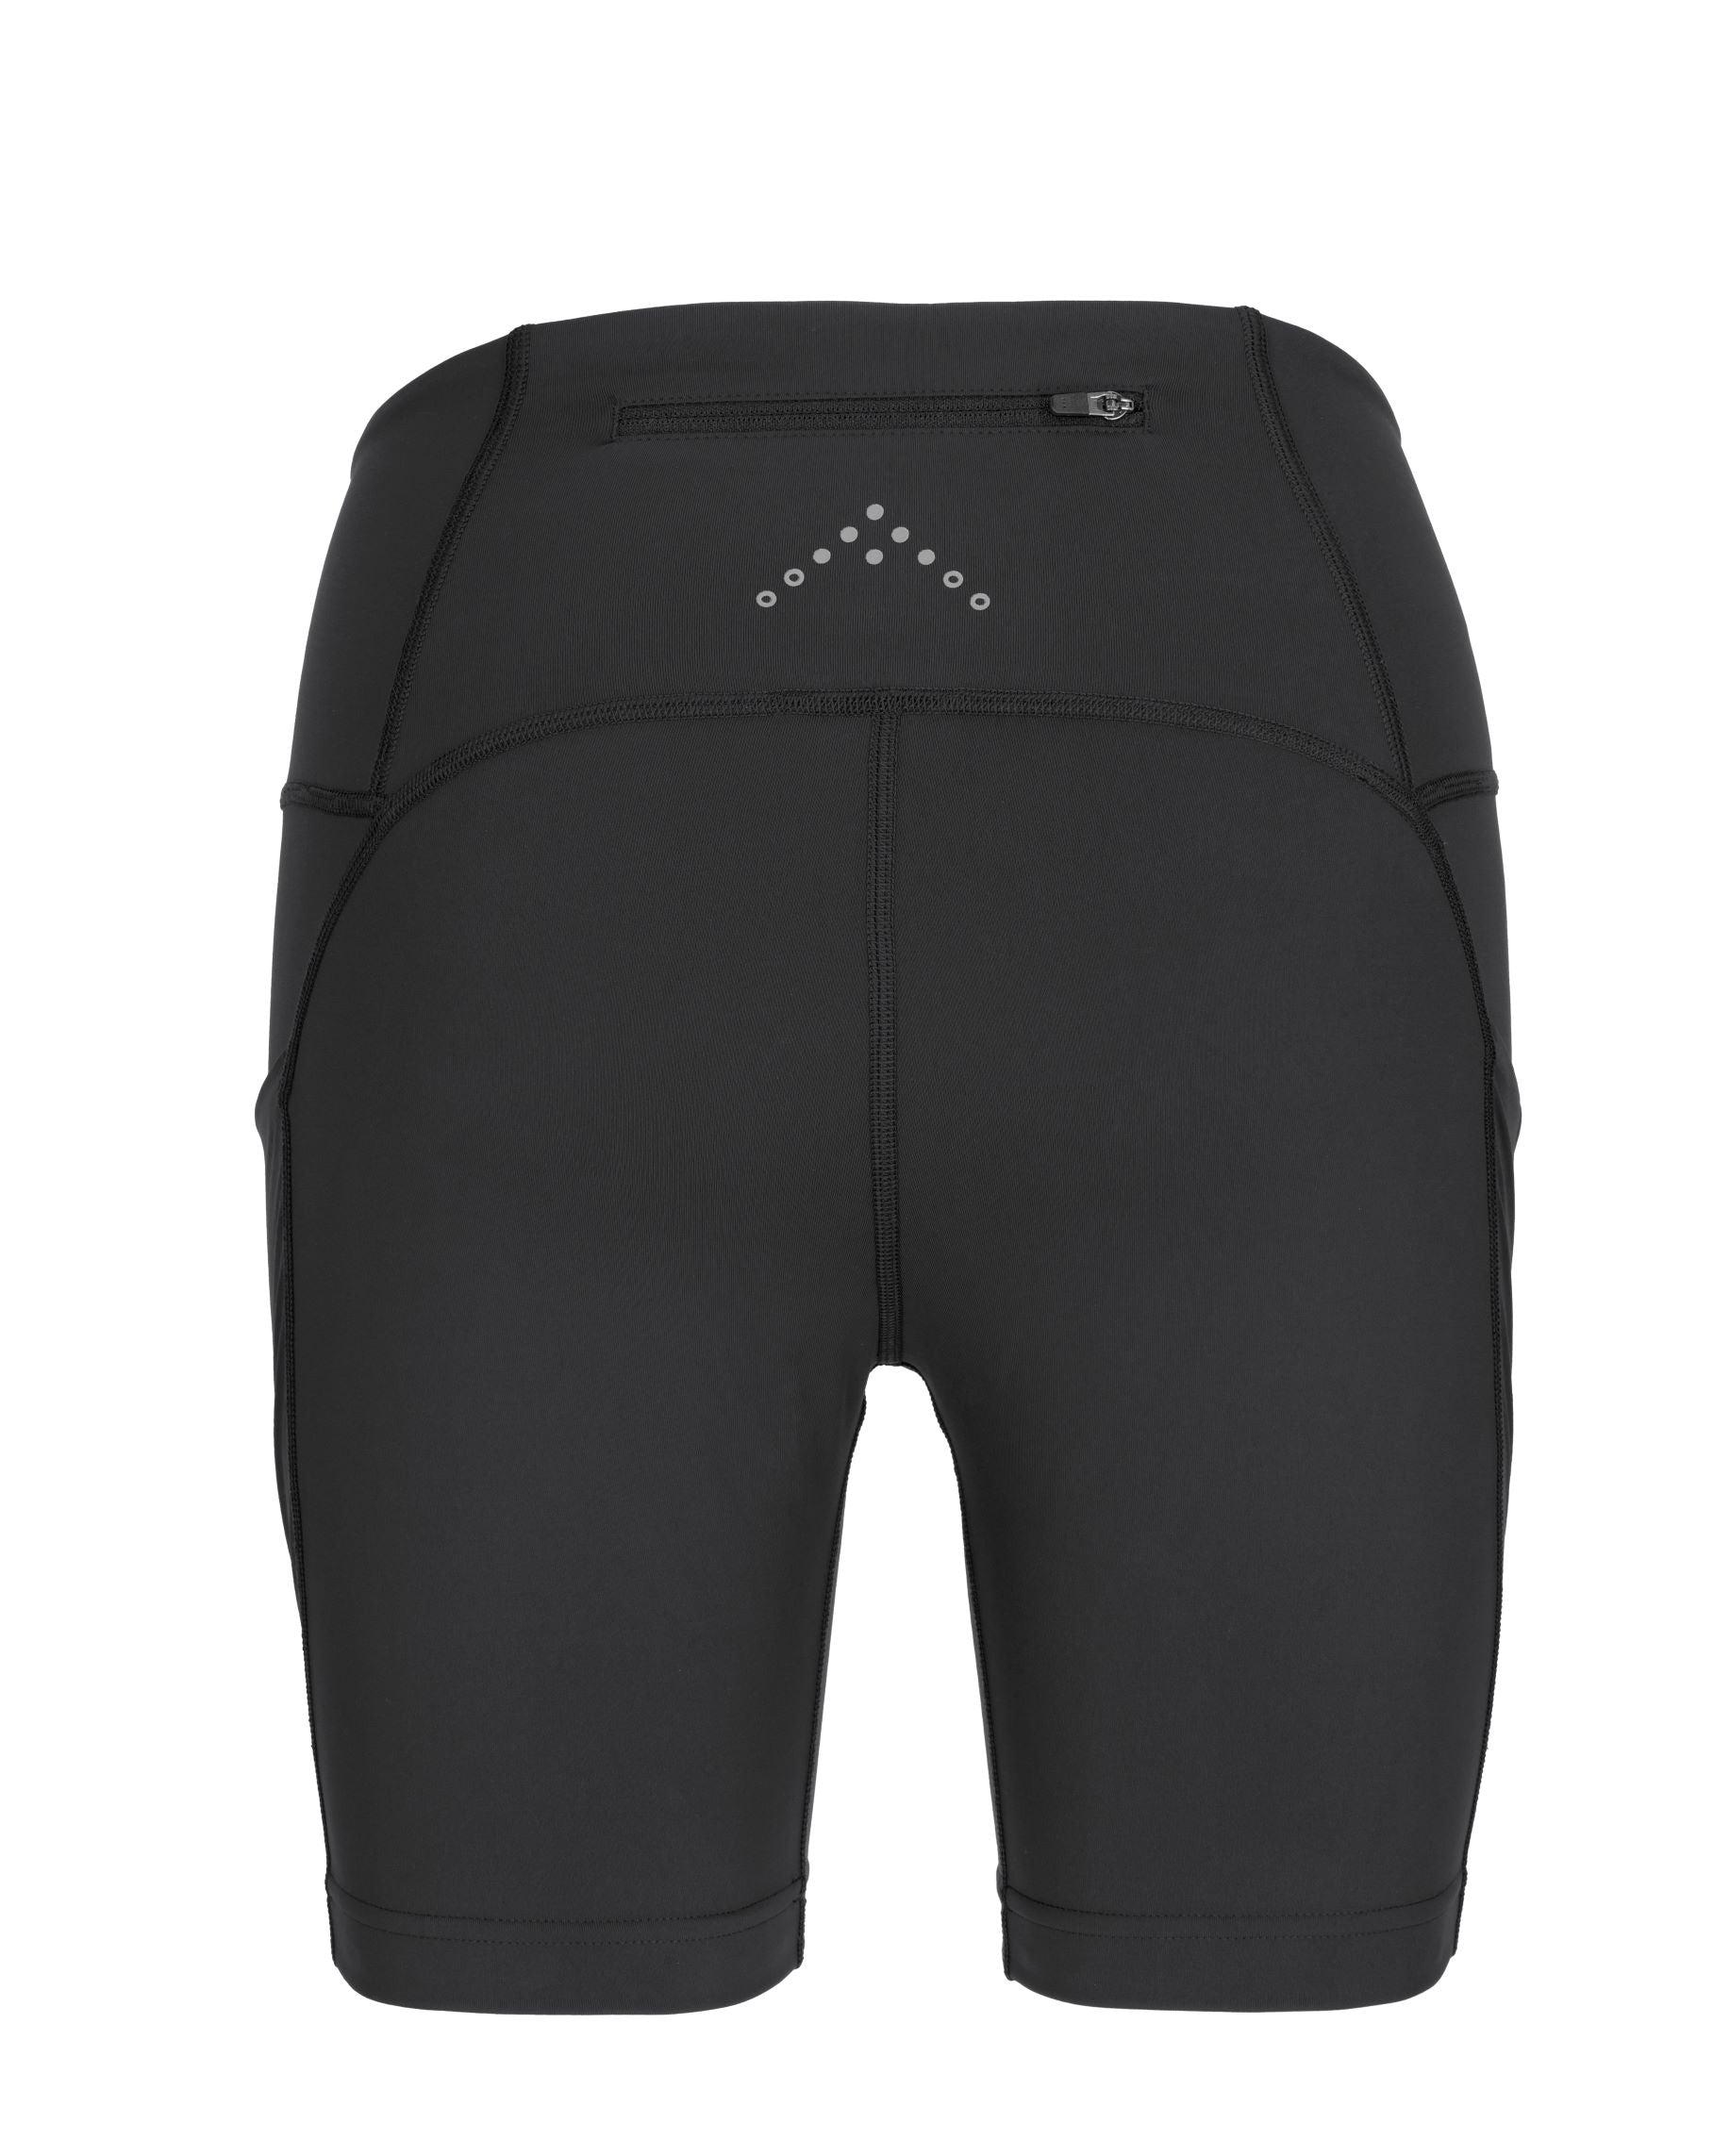 Rab Women's Talus Tights Shorts - Outfitters Store